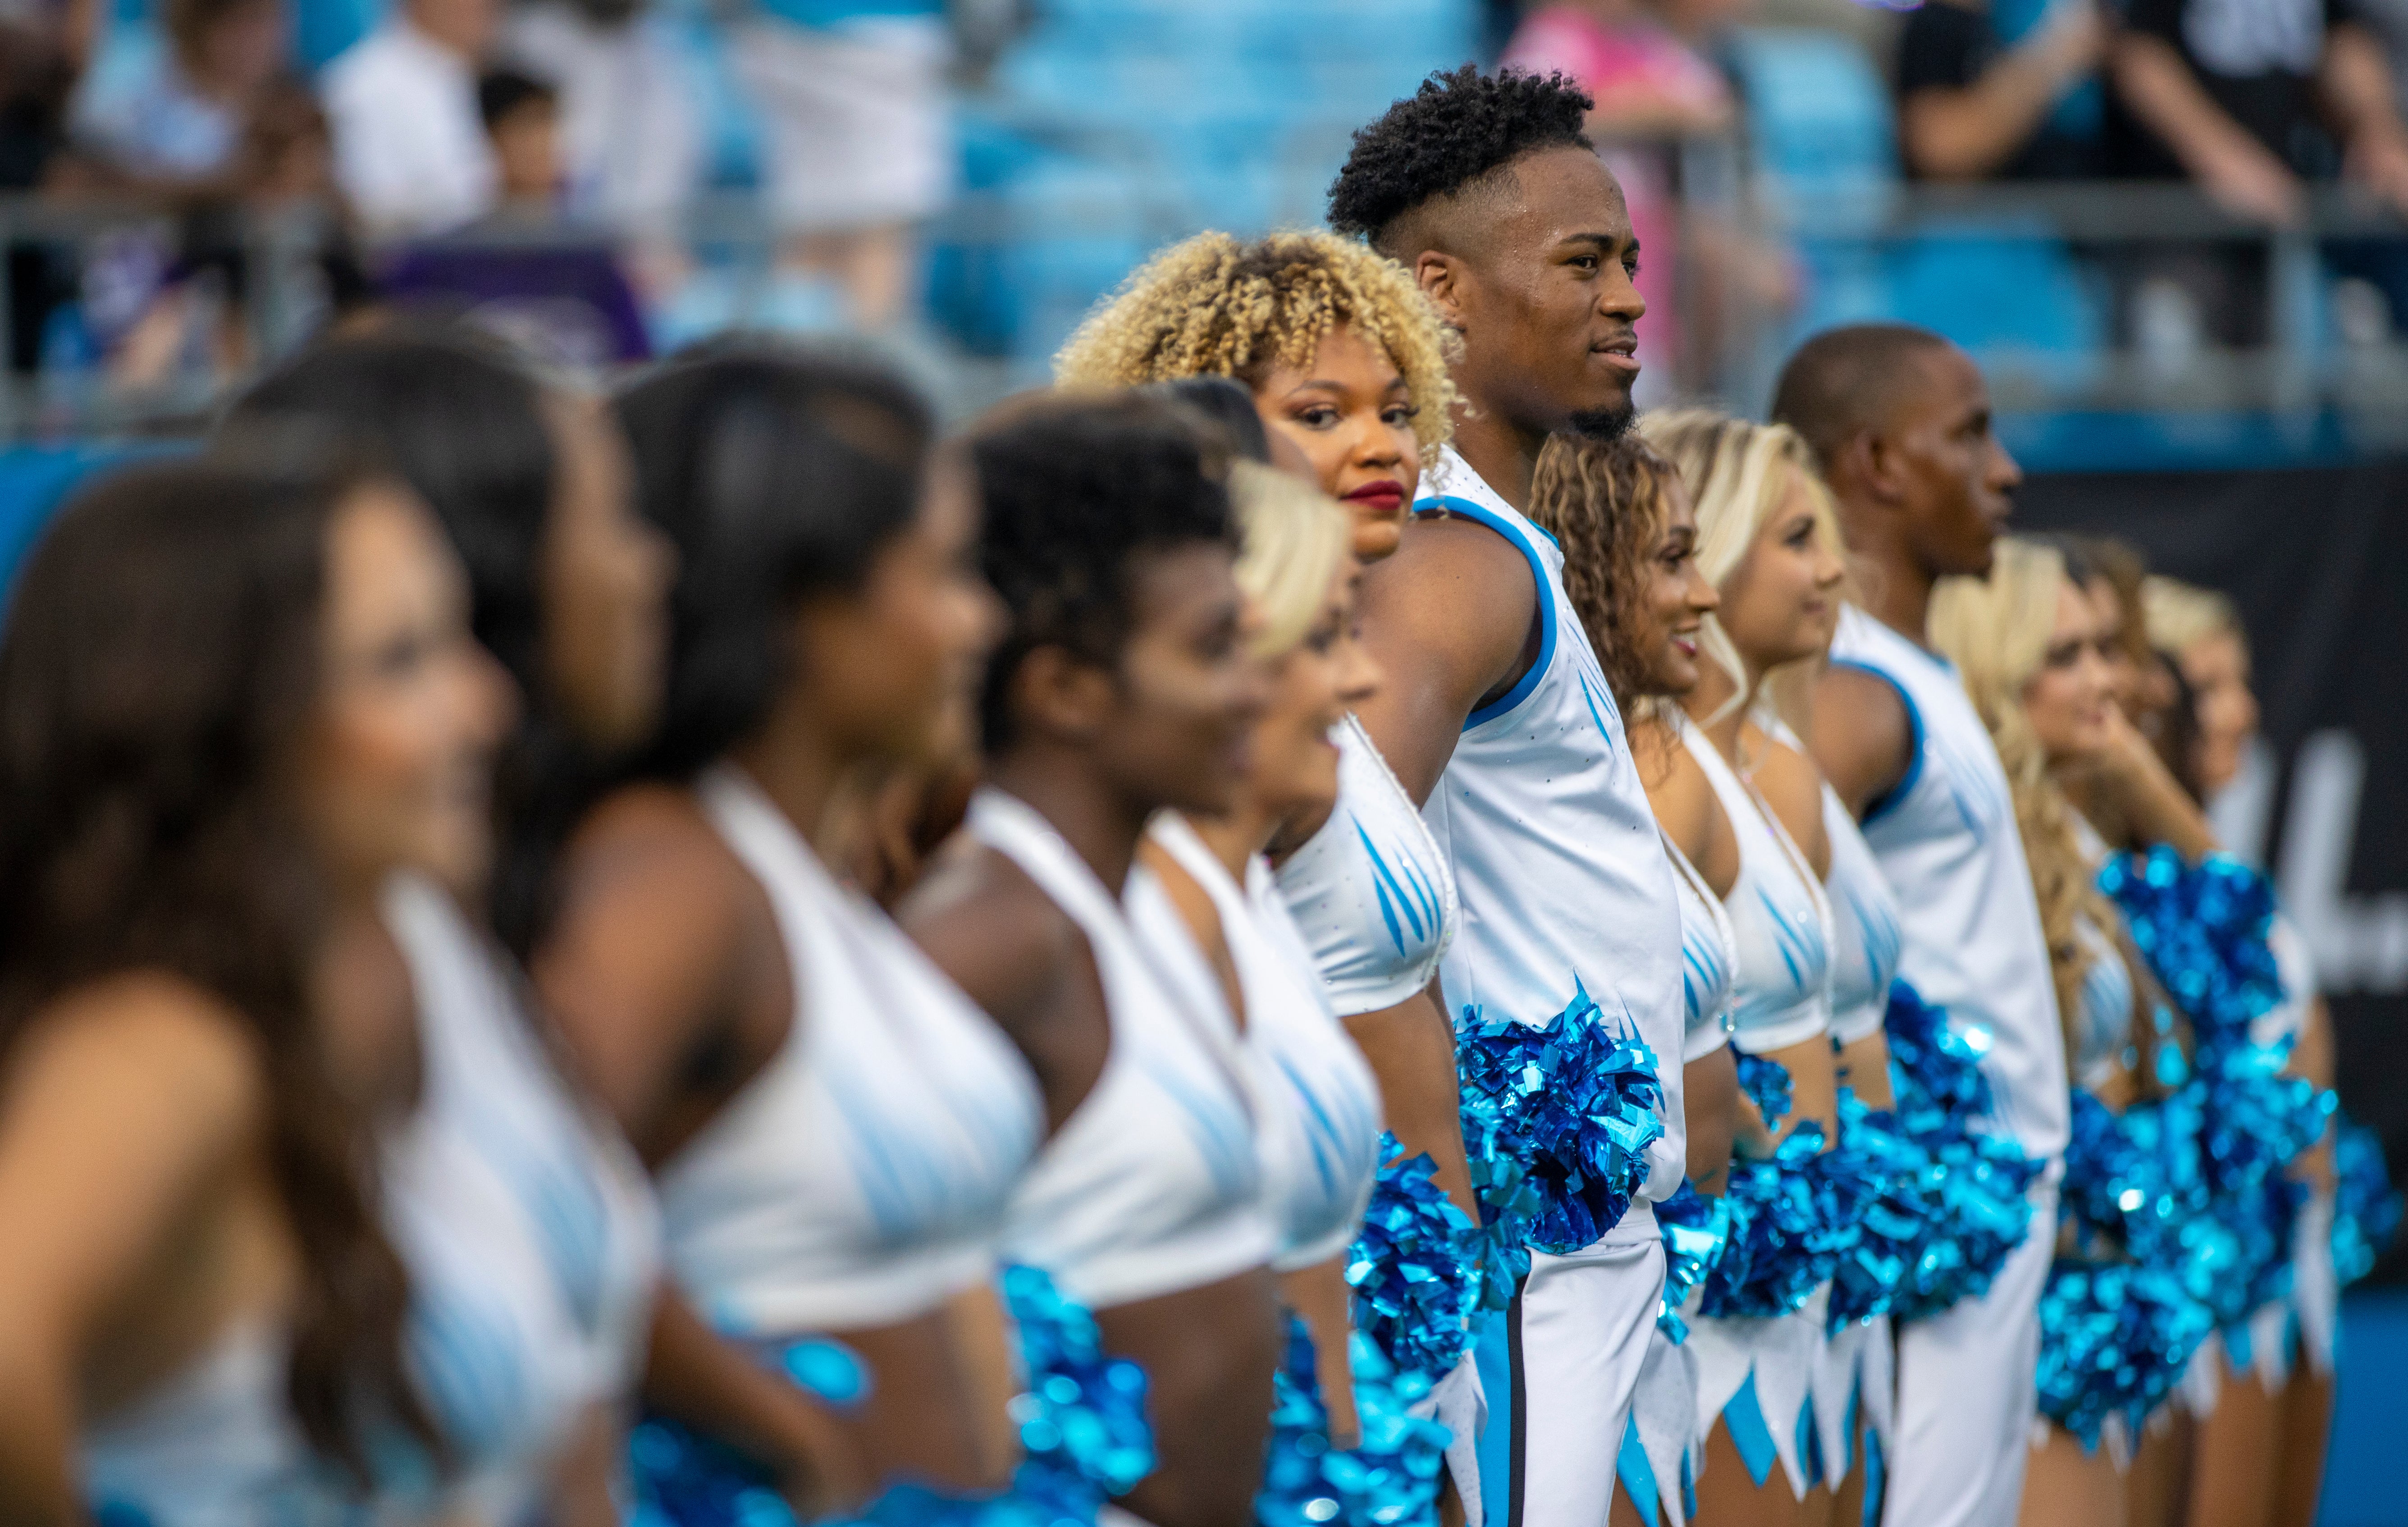 Carolina Panthers cheerleaders, pictured here before a pre-season game, are the highest paid in the NFL